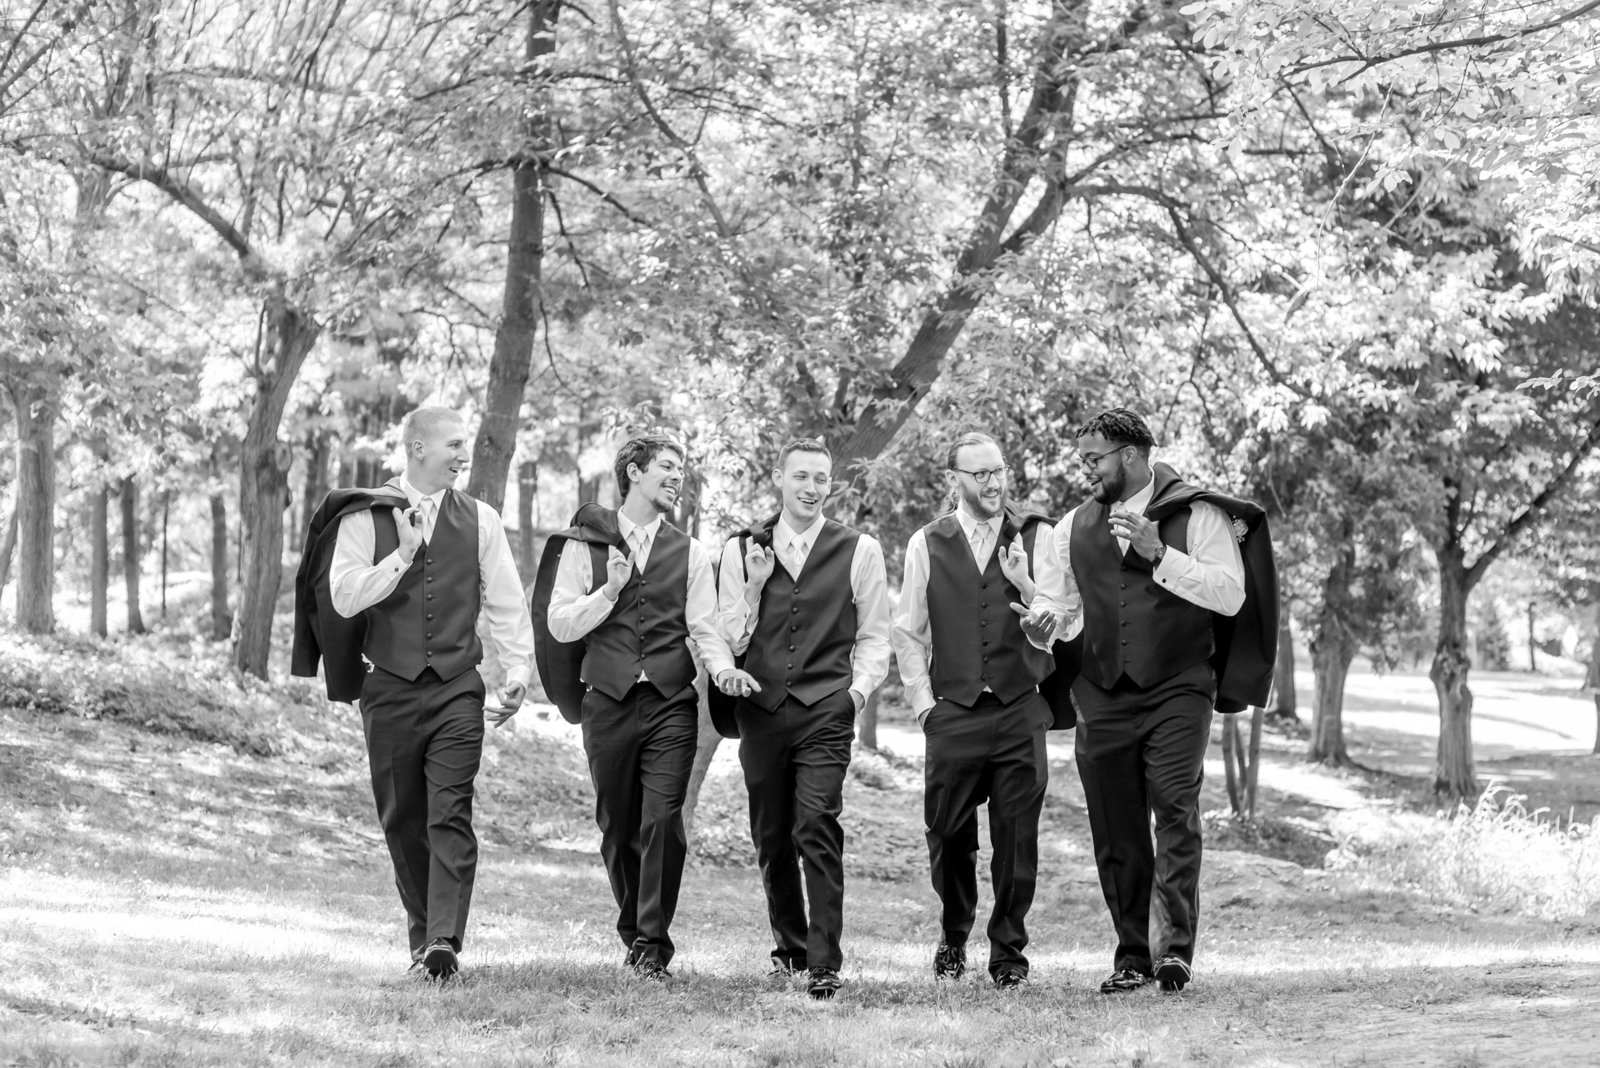 Groomsmen walk together with jackets thrown over their shoulders